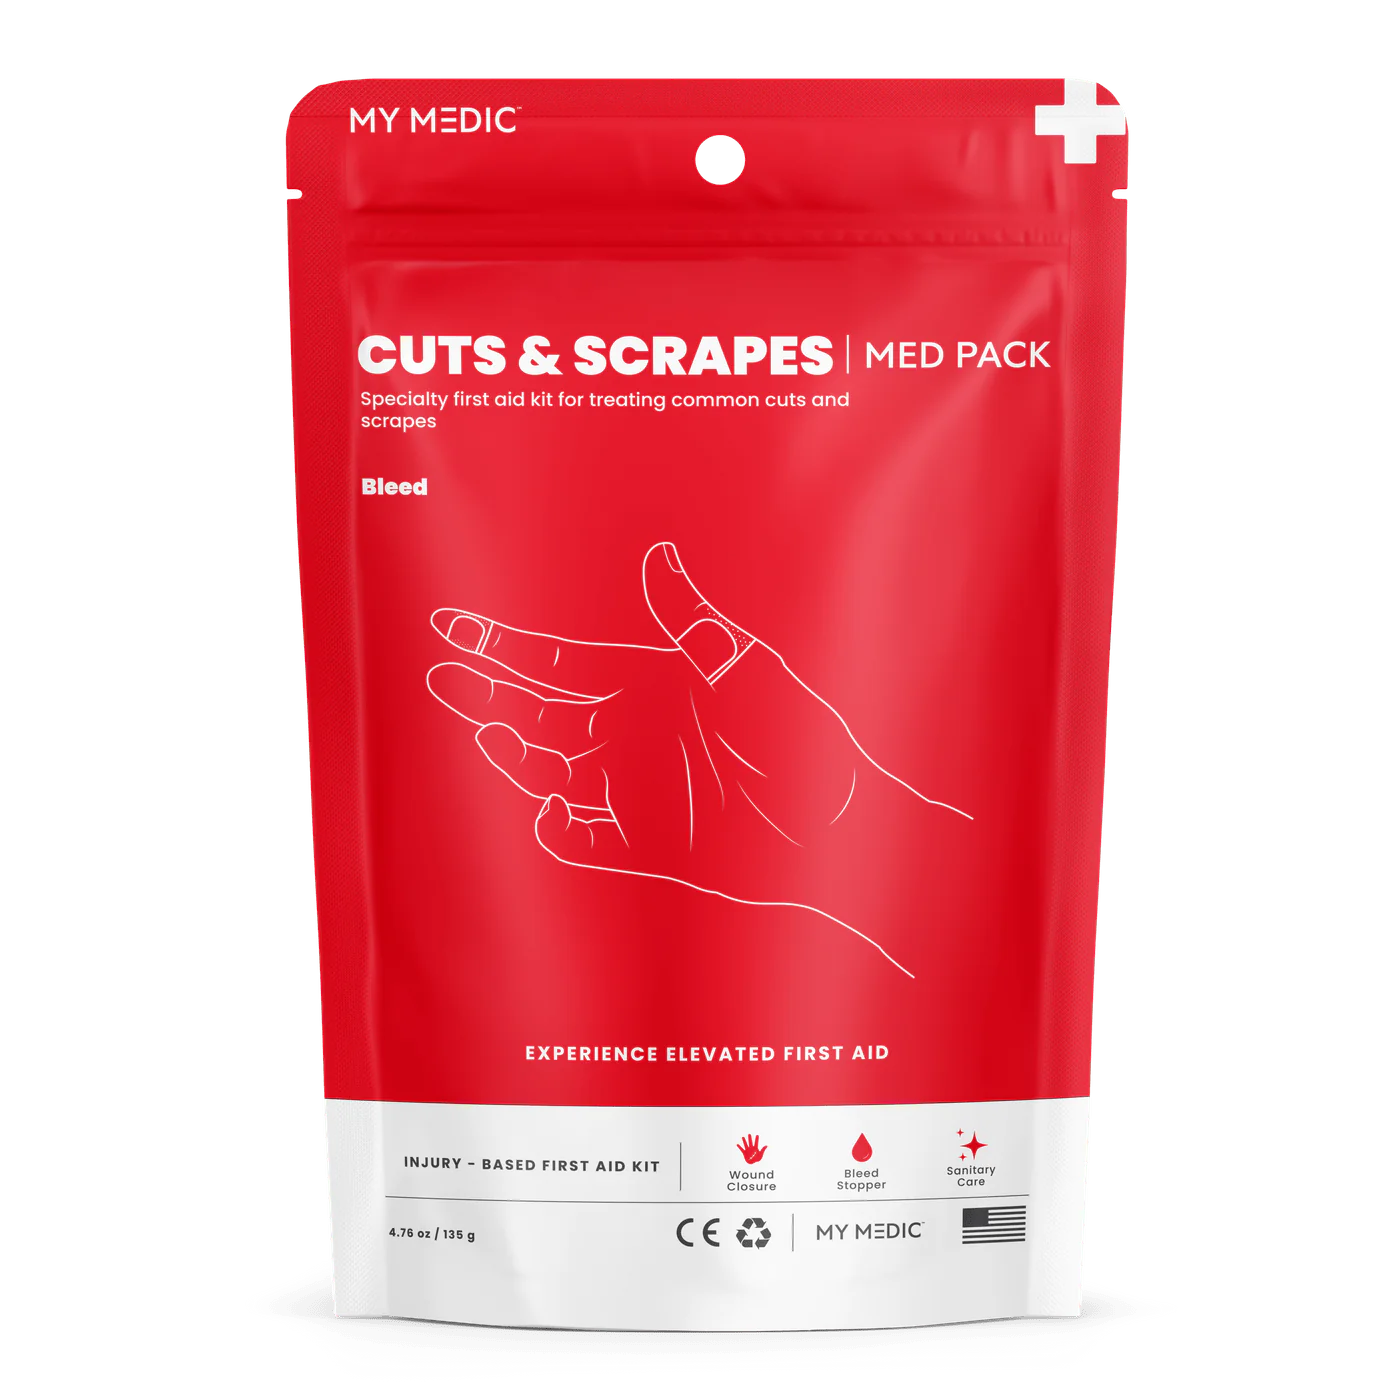 My Medic Cuts and Scrapes Medical Pack